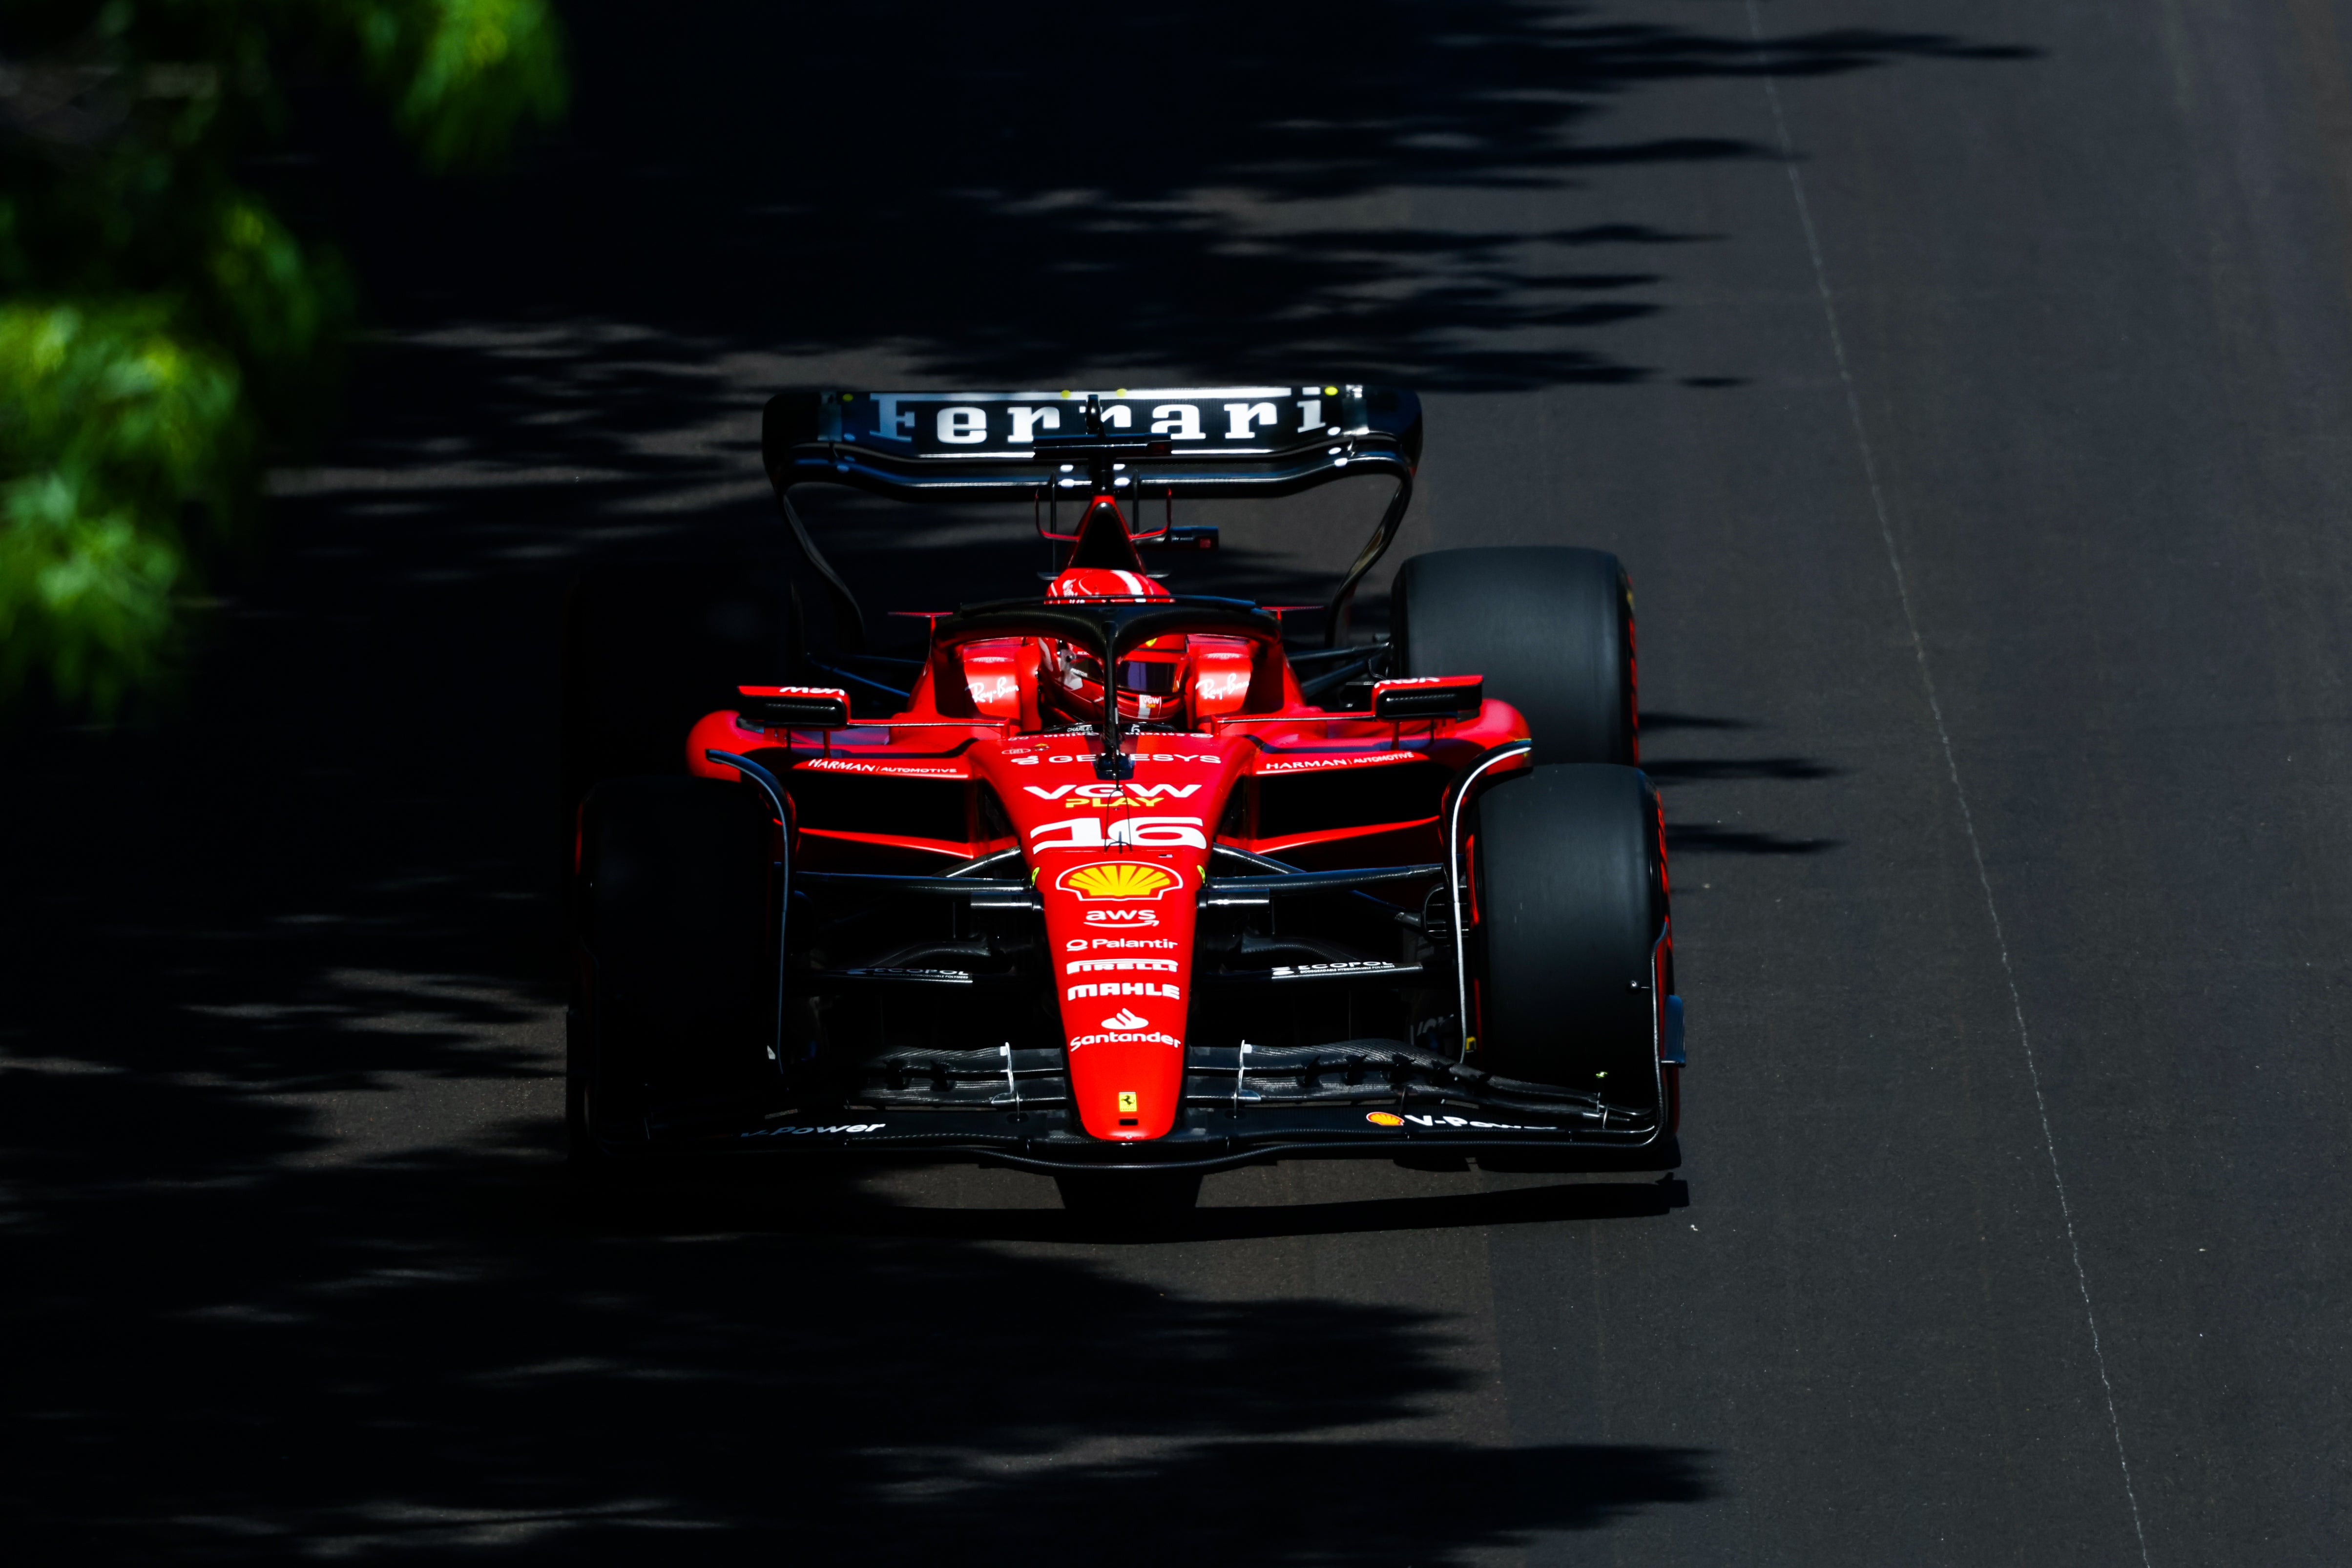 Charles Leclerc grabbed pole for the Saturday sprint race